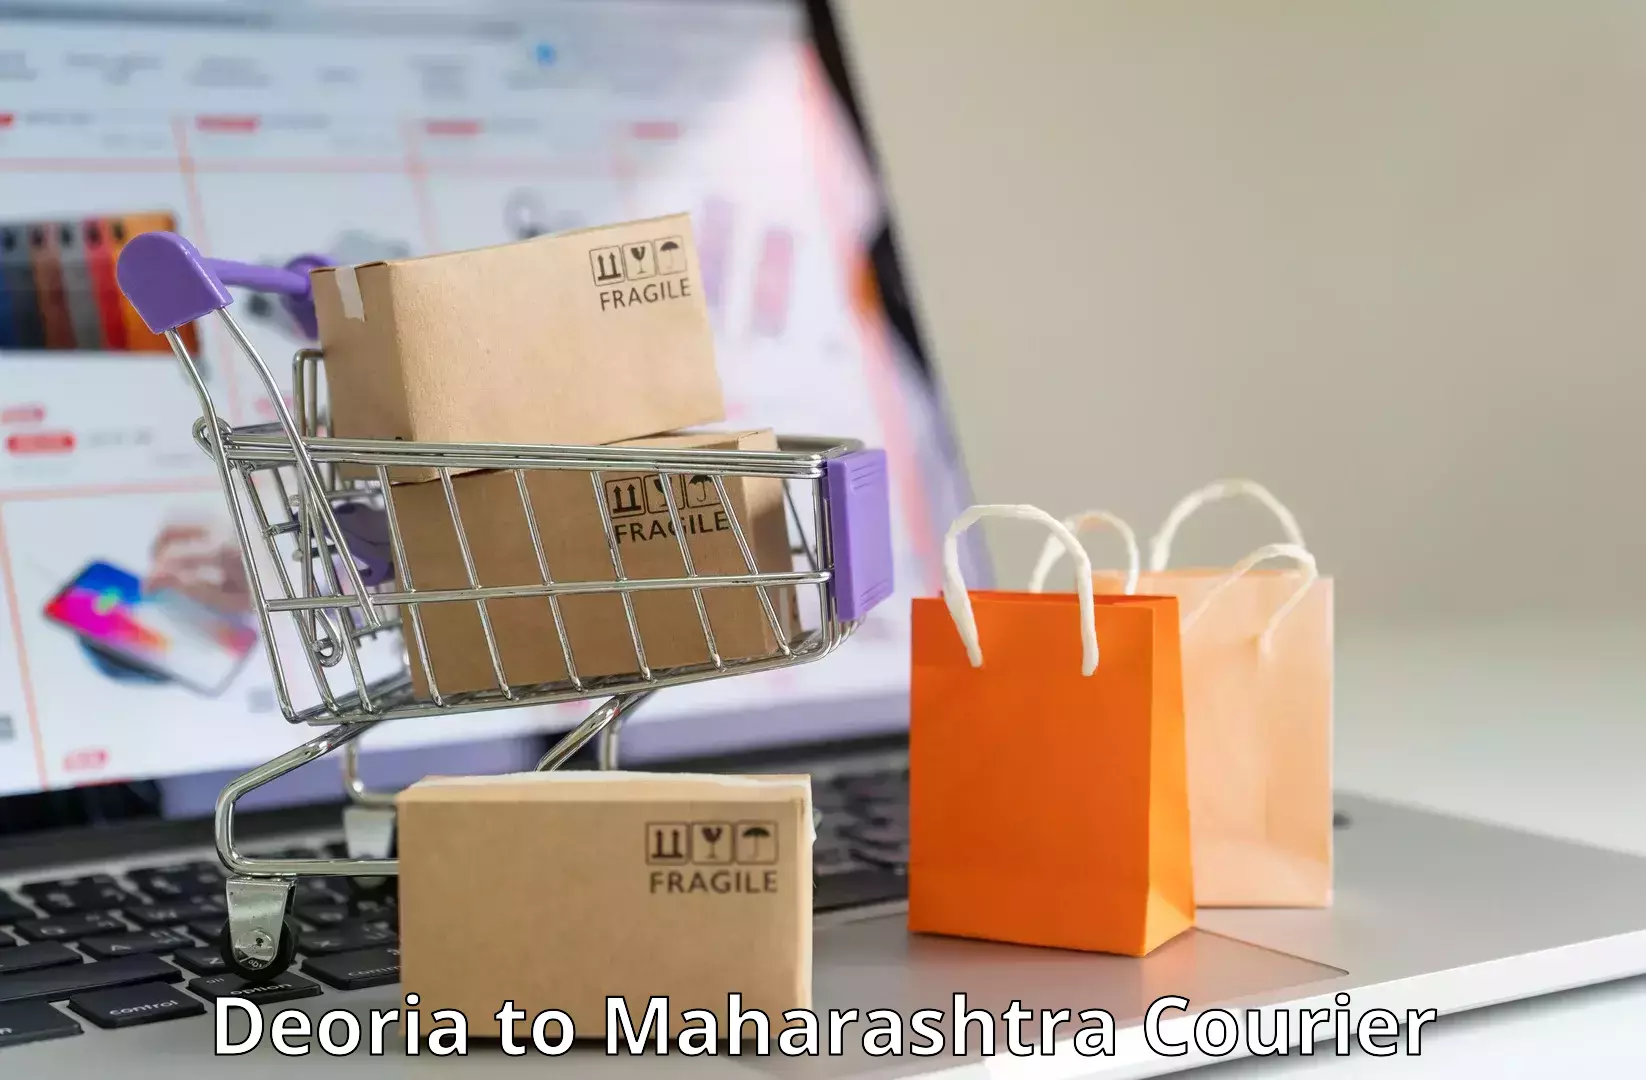 Next-day delivery options Deoria to Jaysingpur